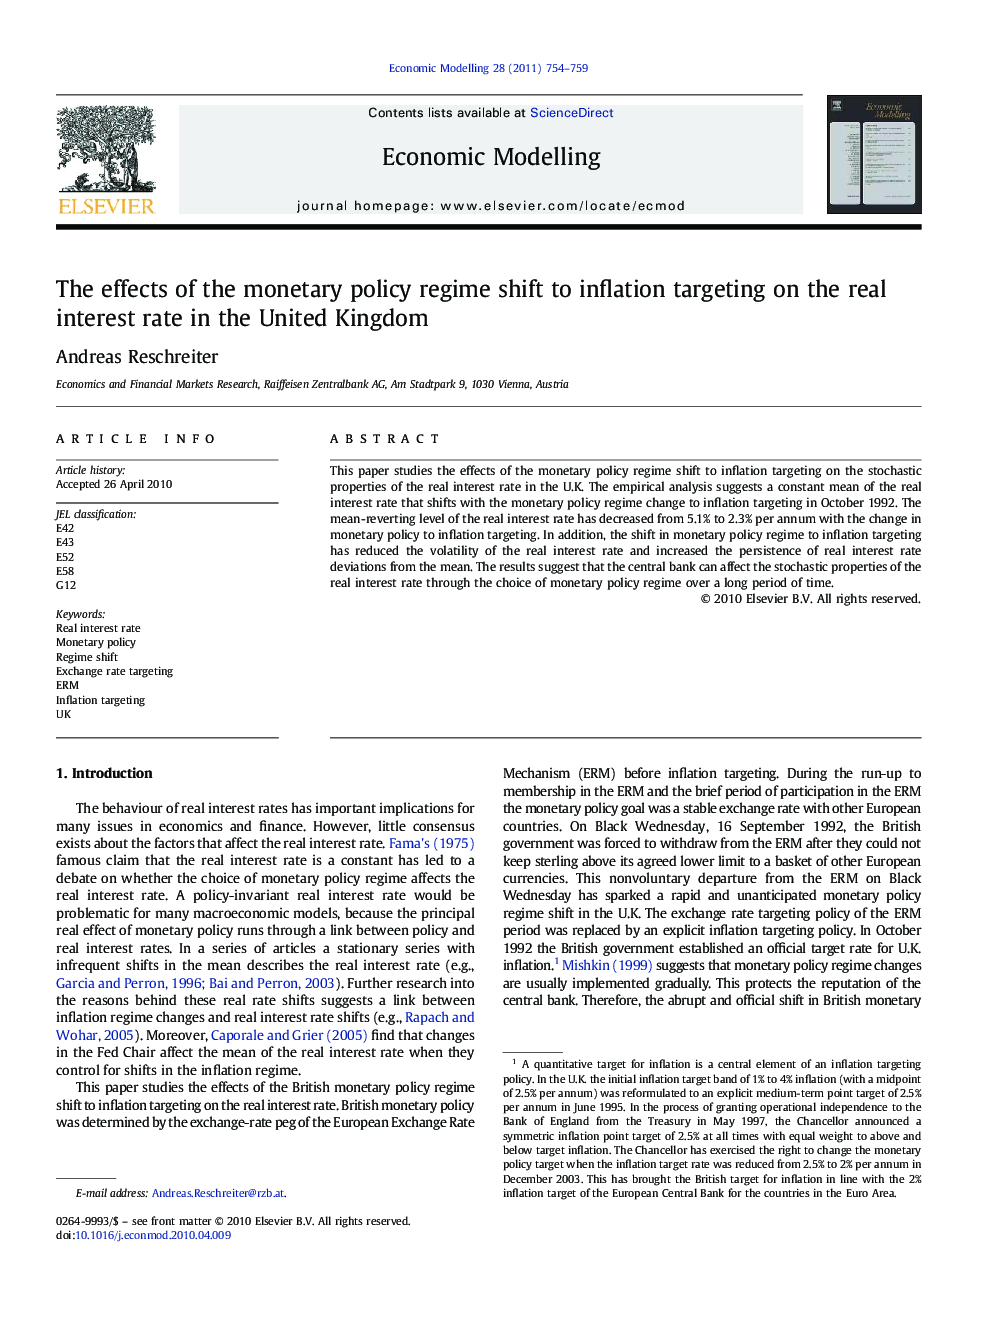 The effects of the monetary policy regime shift to inflation targeting on the real interest rate in the United Kingdom